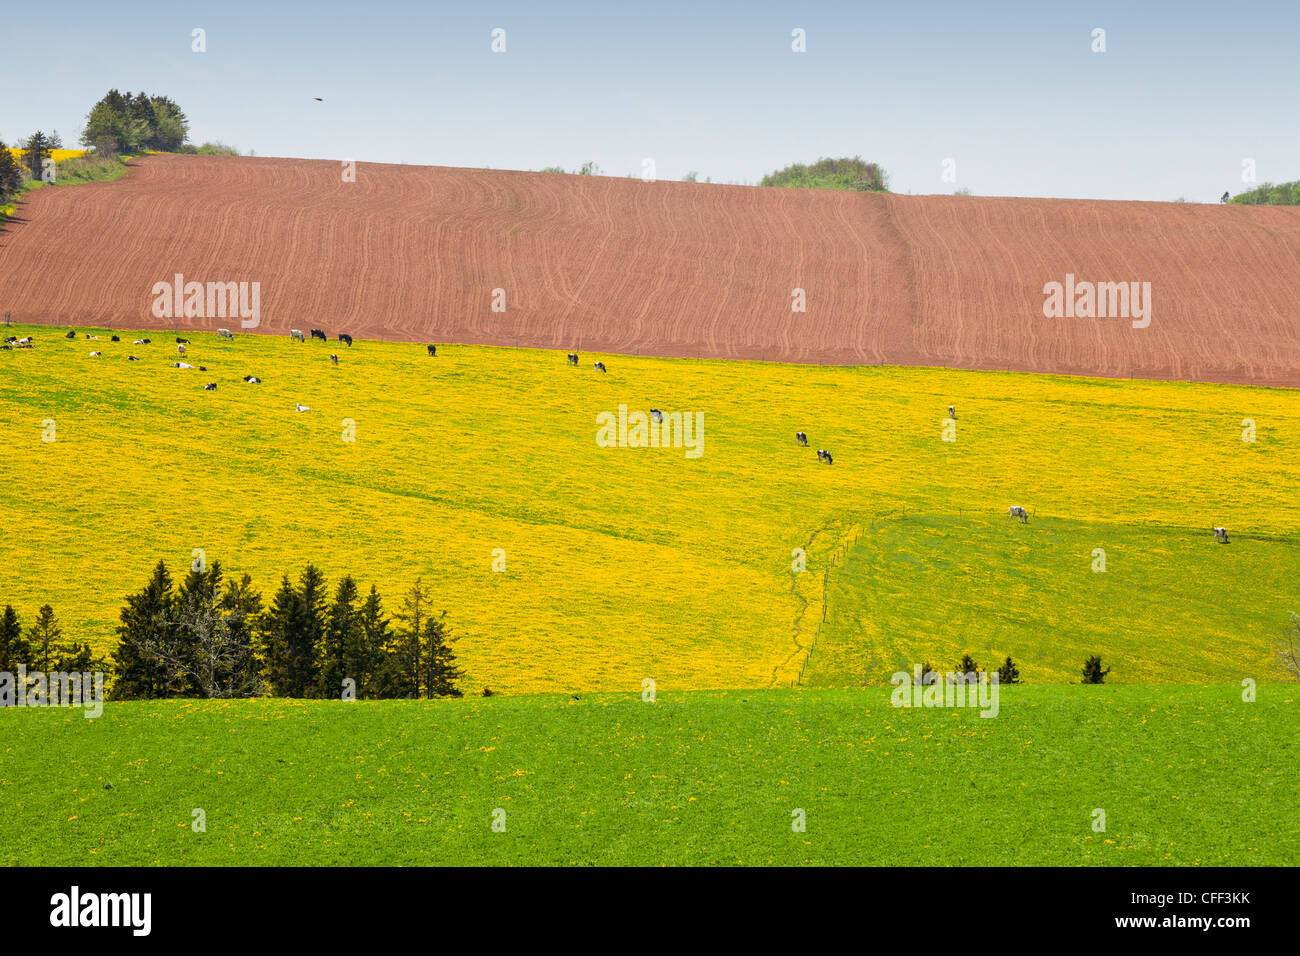 Dairy cows grazing in field of dandelions, Grahams Road, Prince Edward Island, Canada Stock Photo